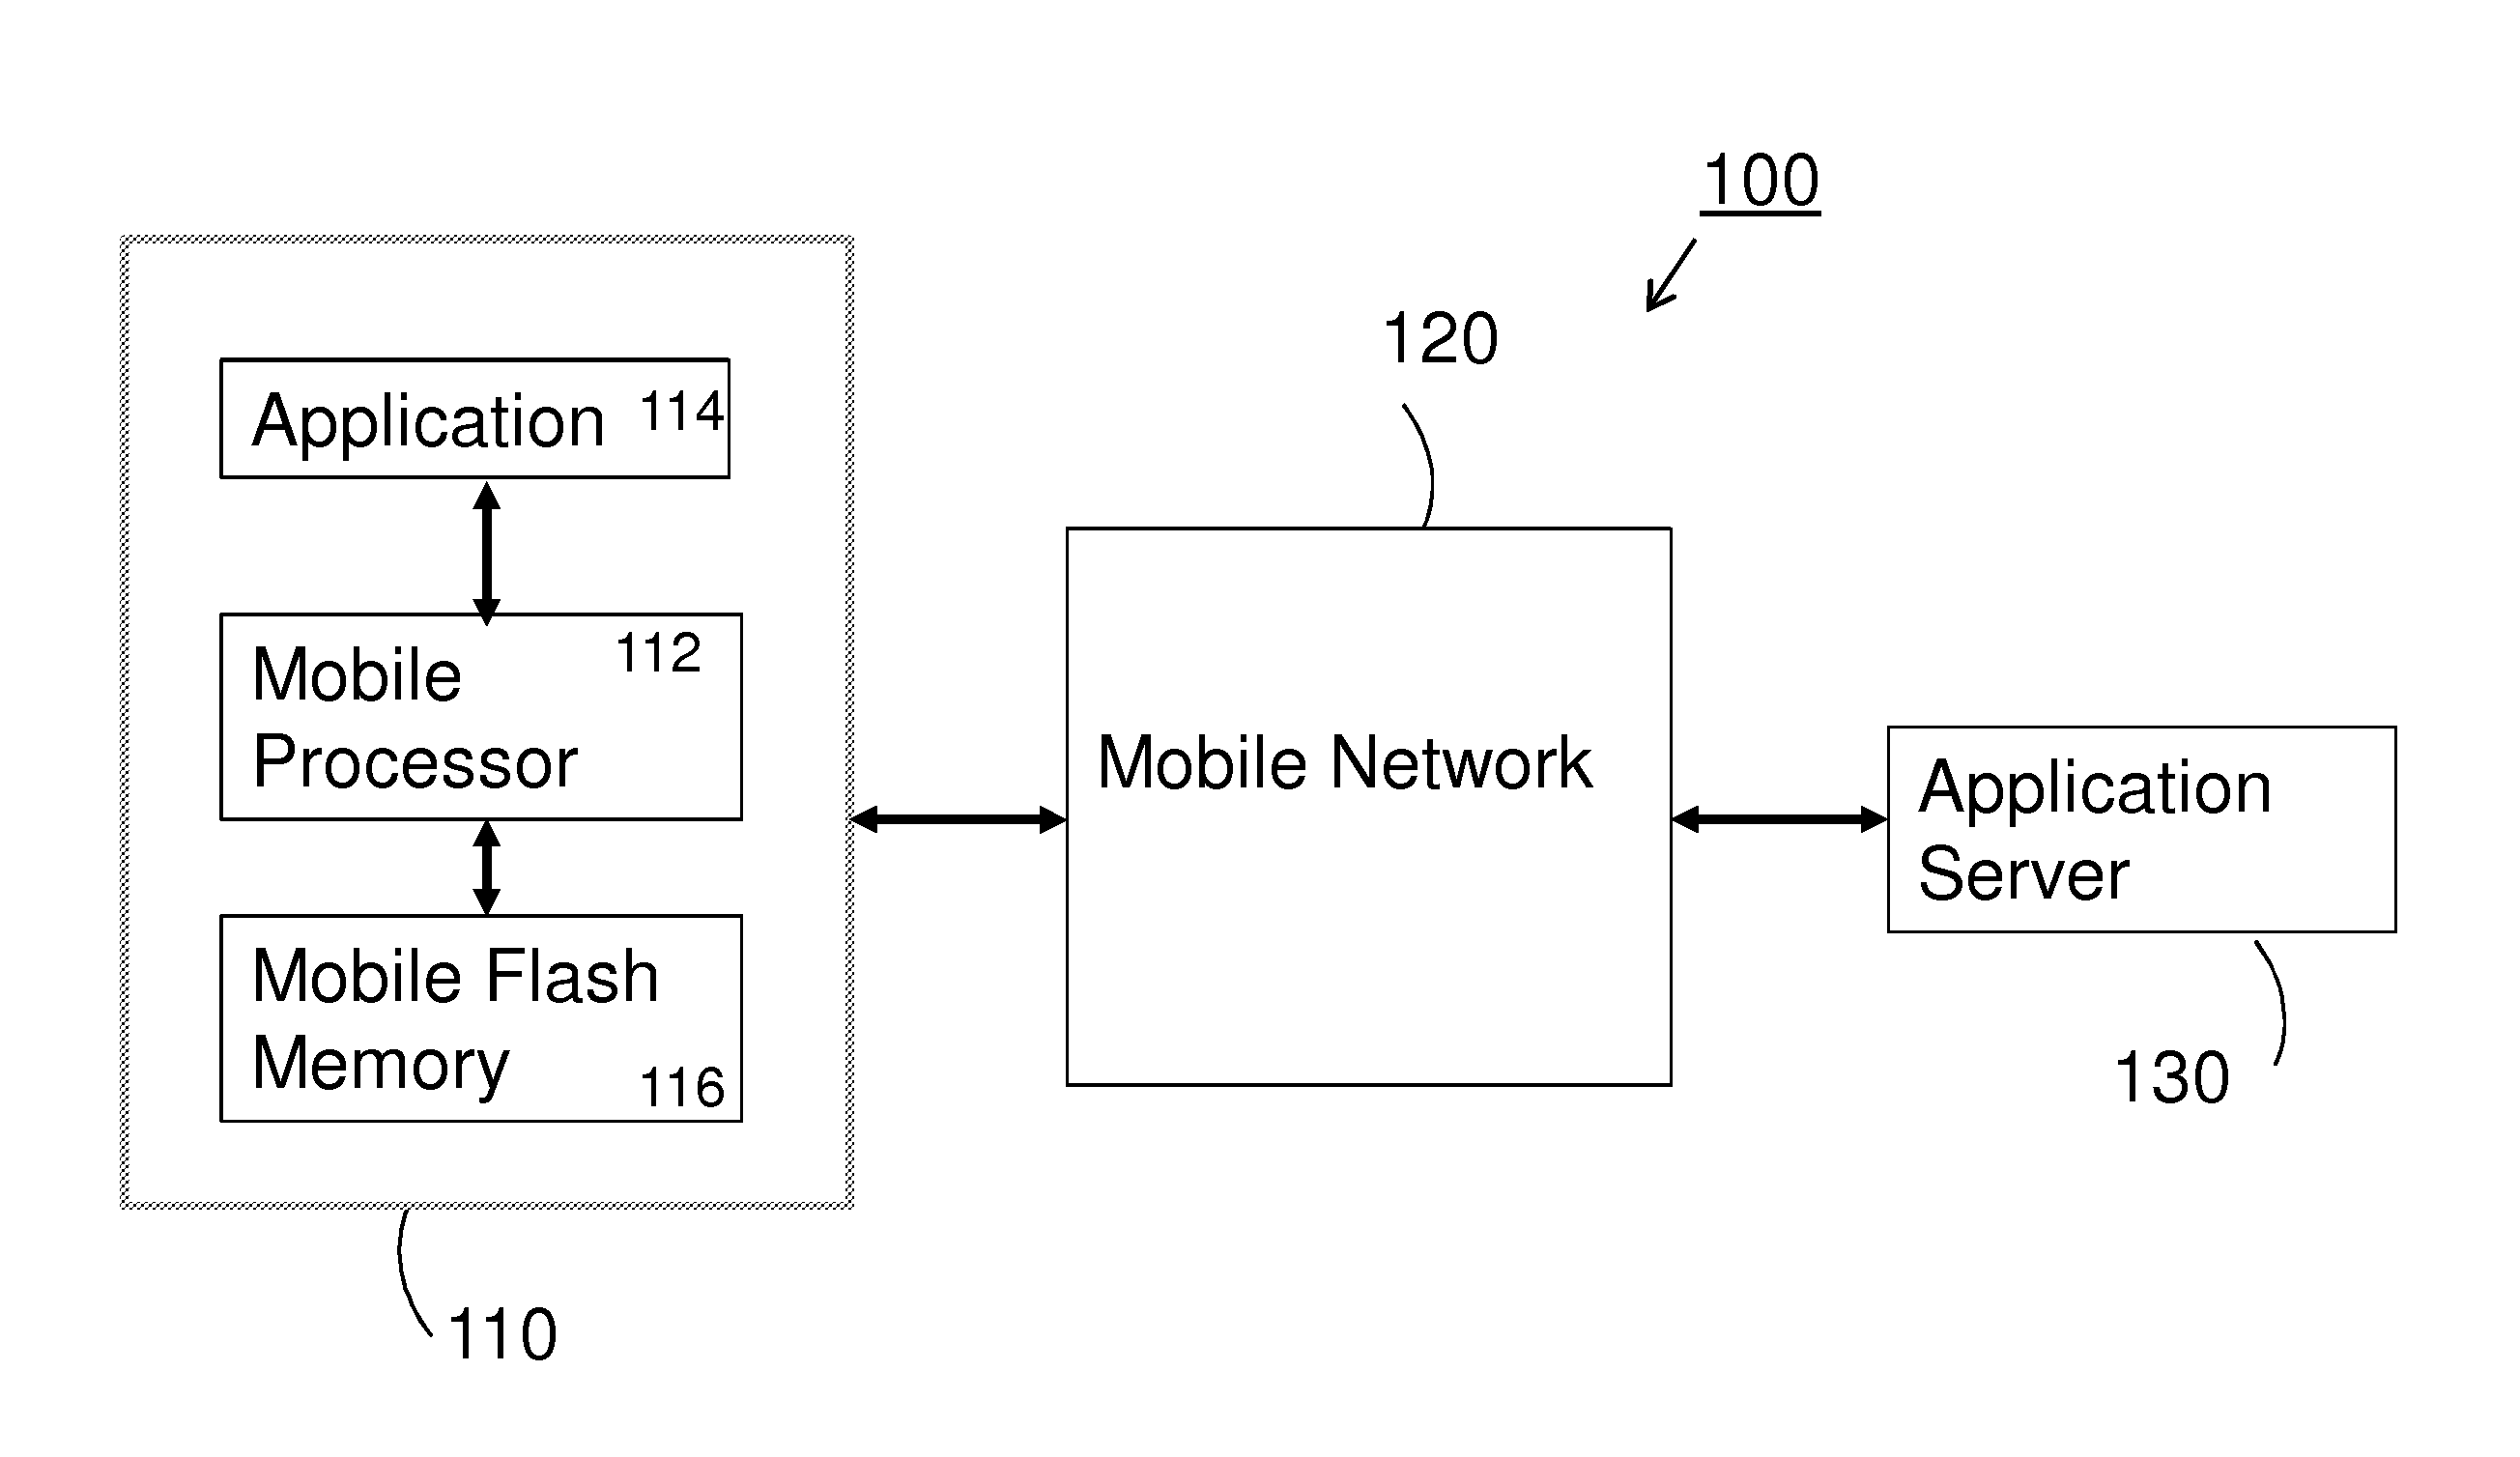 Facilitating assisted GPS and other network services in mobile phones across disparate mobile communications networks